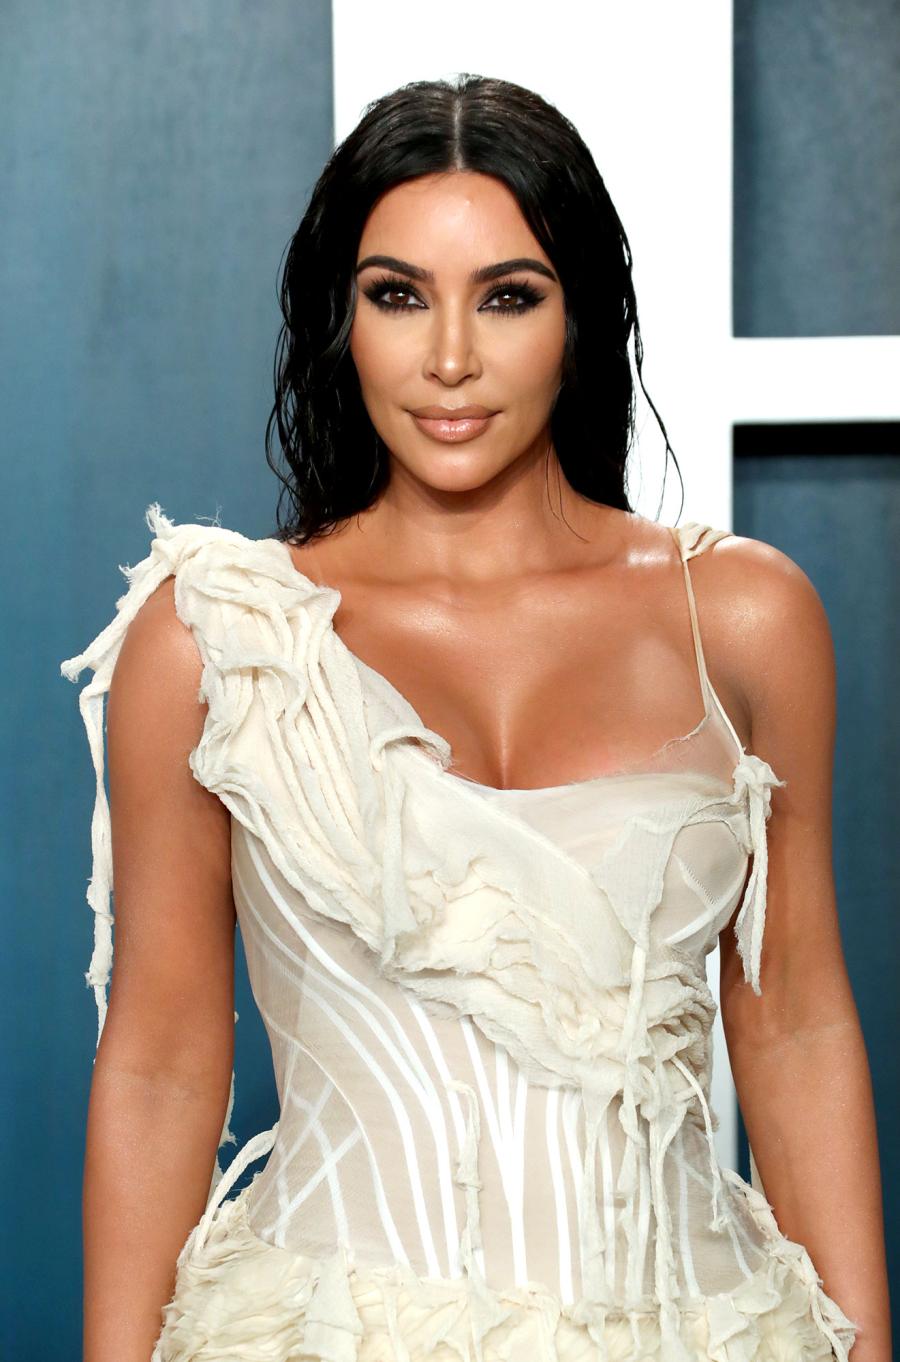 Commitment to Her Job Kim Kardashian Gushes Over Candice Swanepoel at Skims Campaign Ahead of Kanye West Romance Rumors